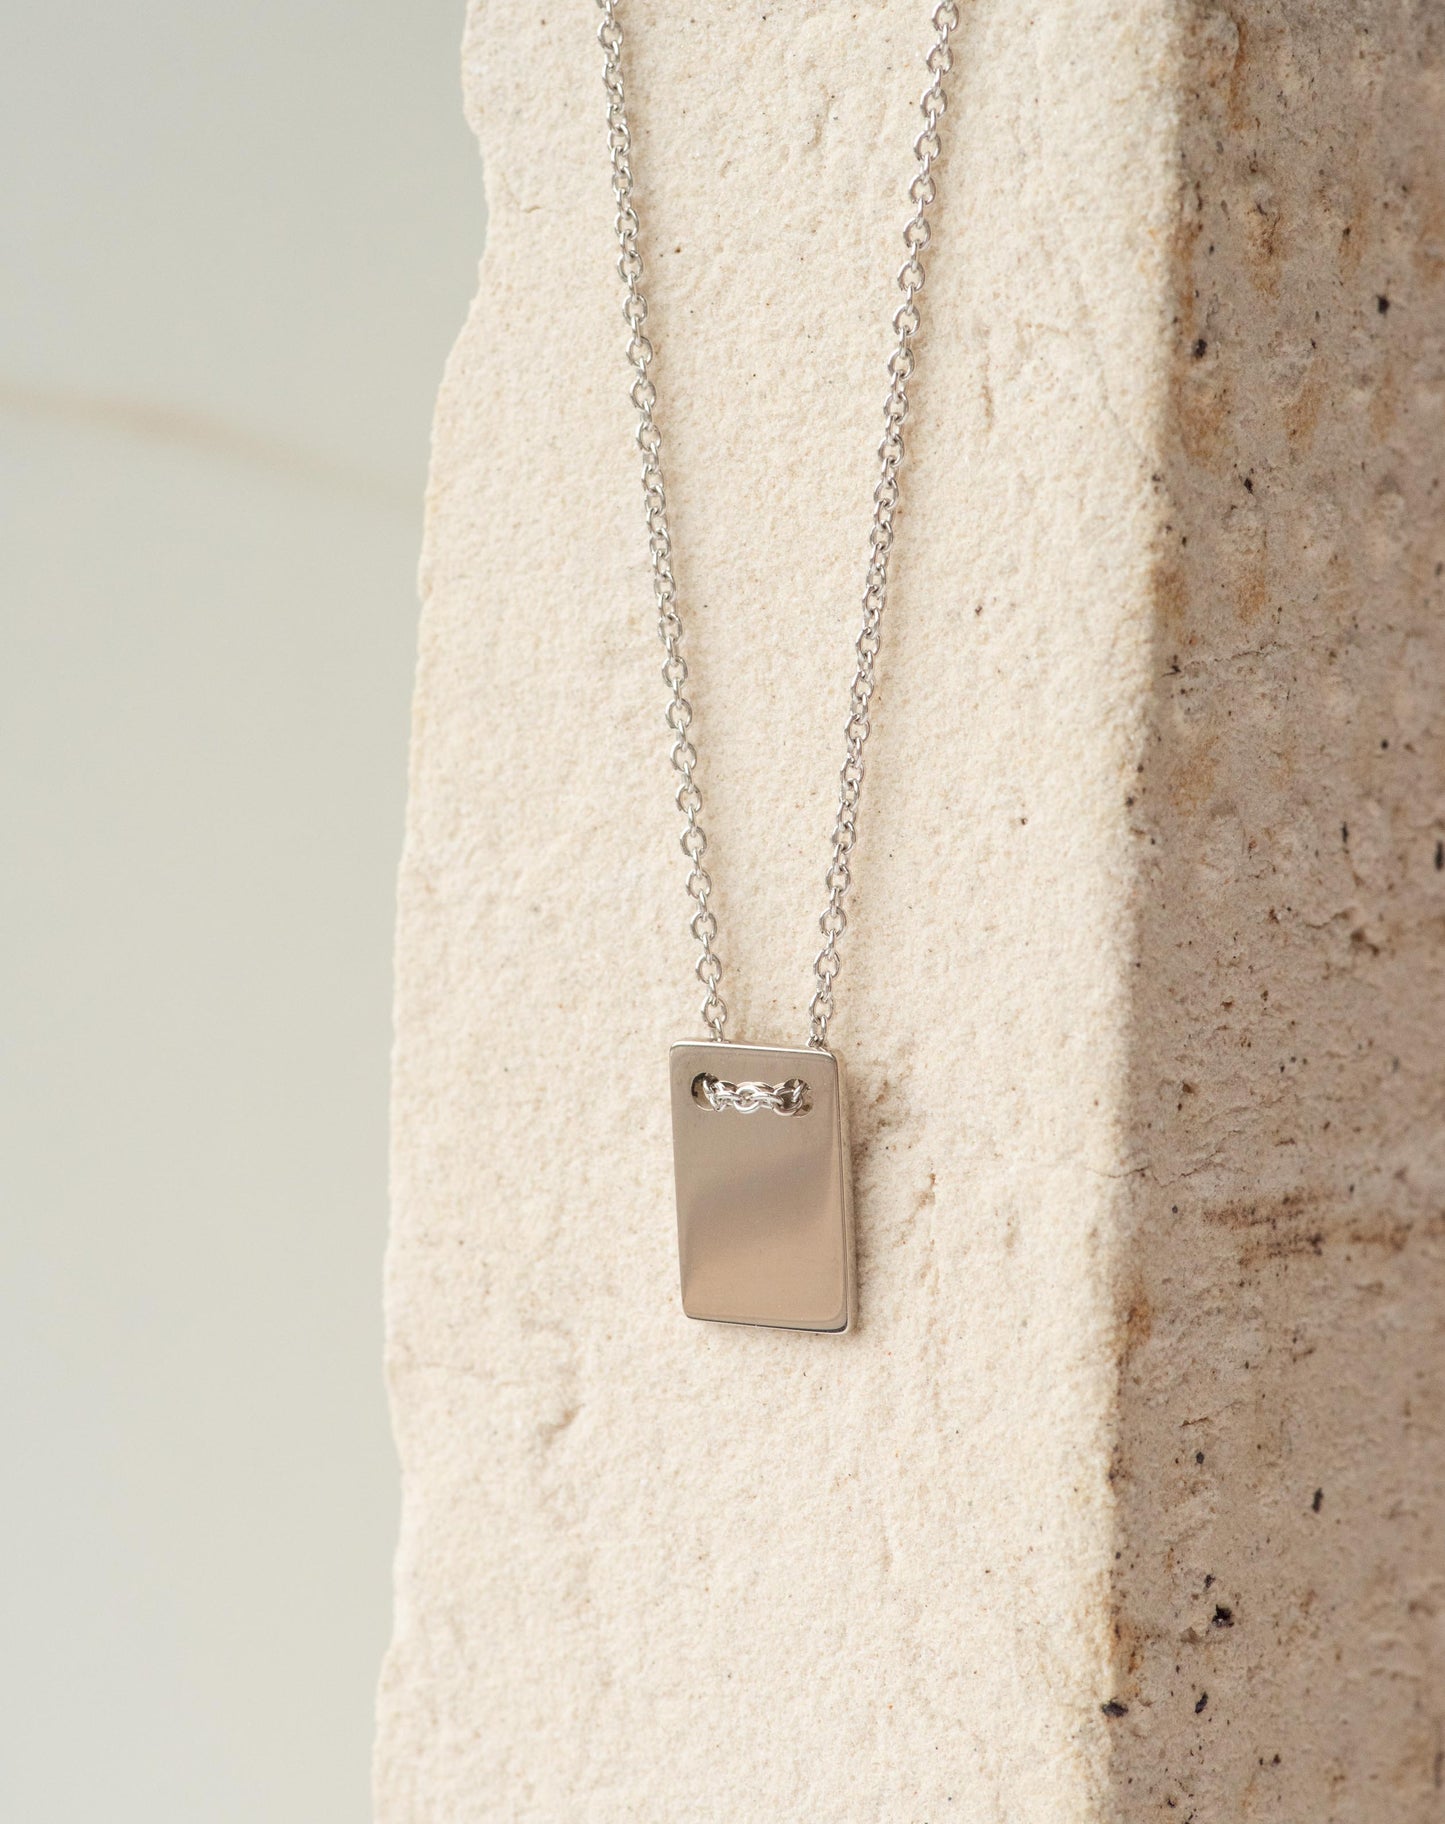 Insignia Pendant Necklace By Dean & Dust